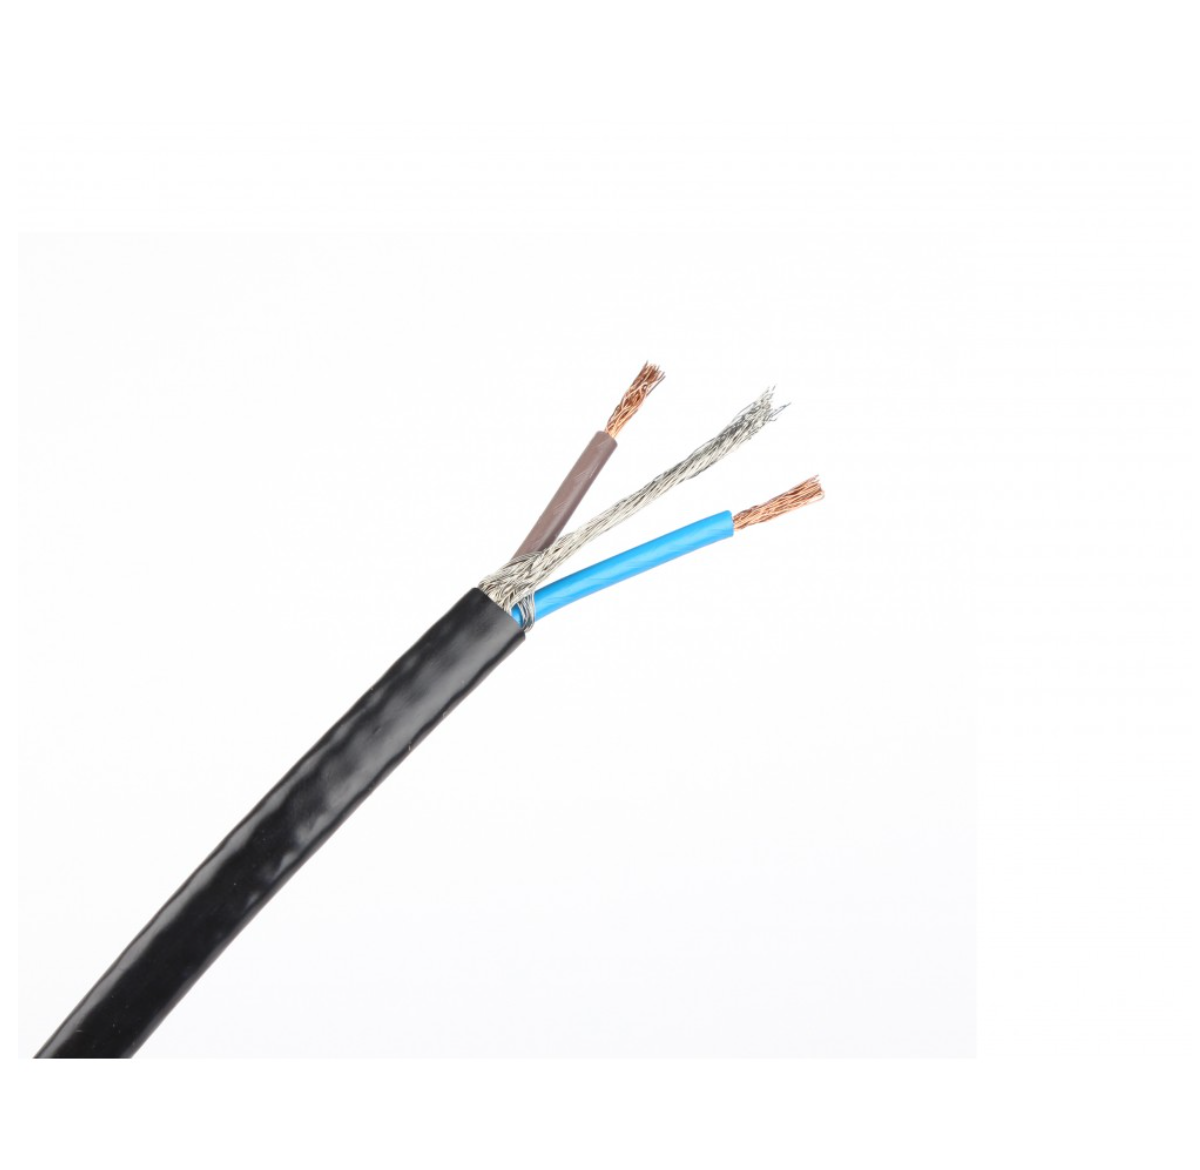 Heating cable - 20m